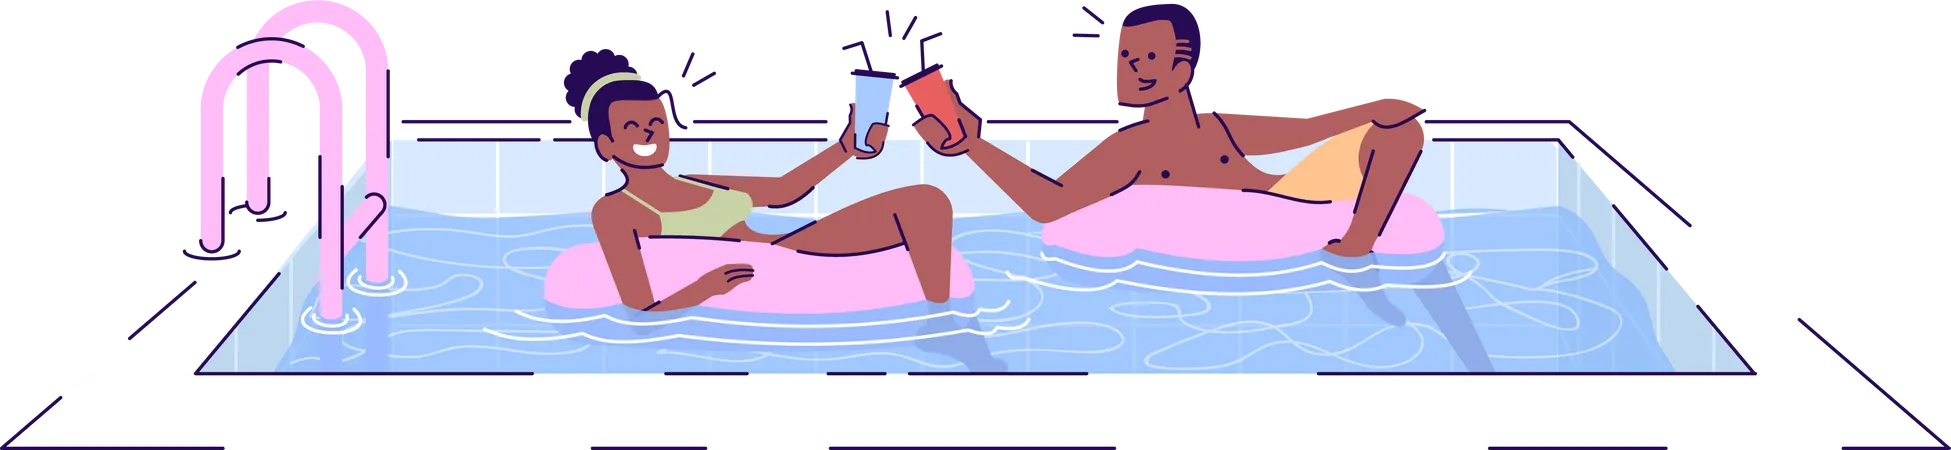 Couple In Swimming Pool Flat Vector Illustration Friends Swimming In Rubber Rings Drinking Cocktails Romantic Date Man Woman Flirting Cartoon Characters With Outline Elements On White Background Illustration